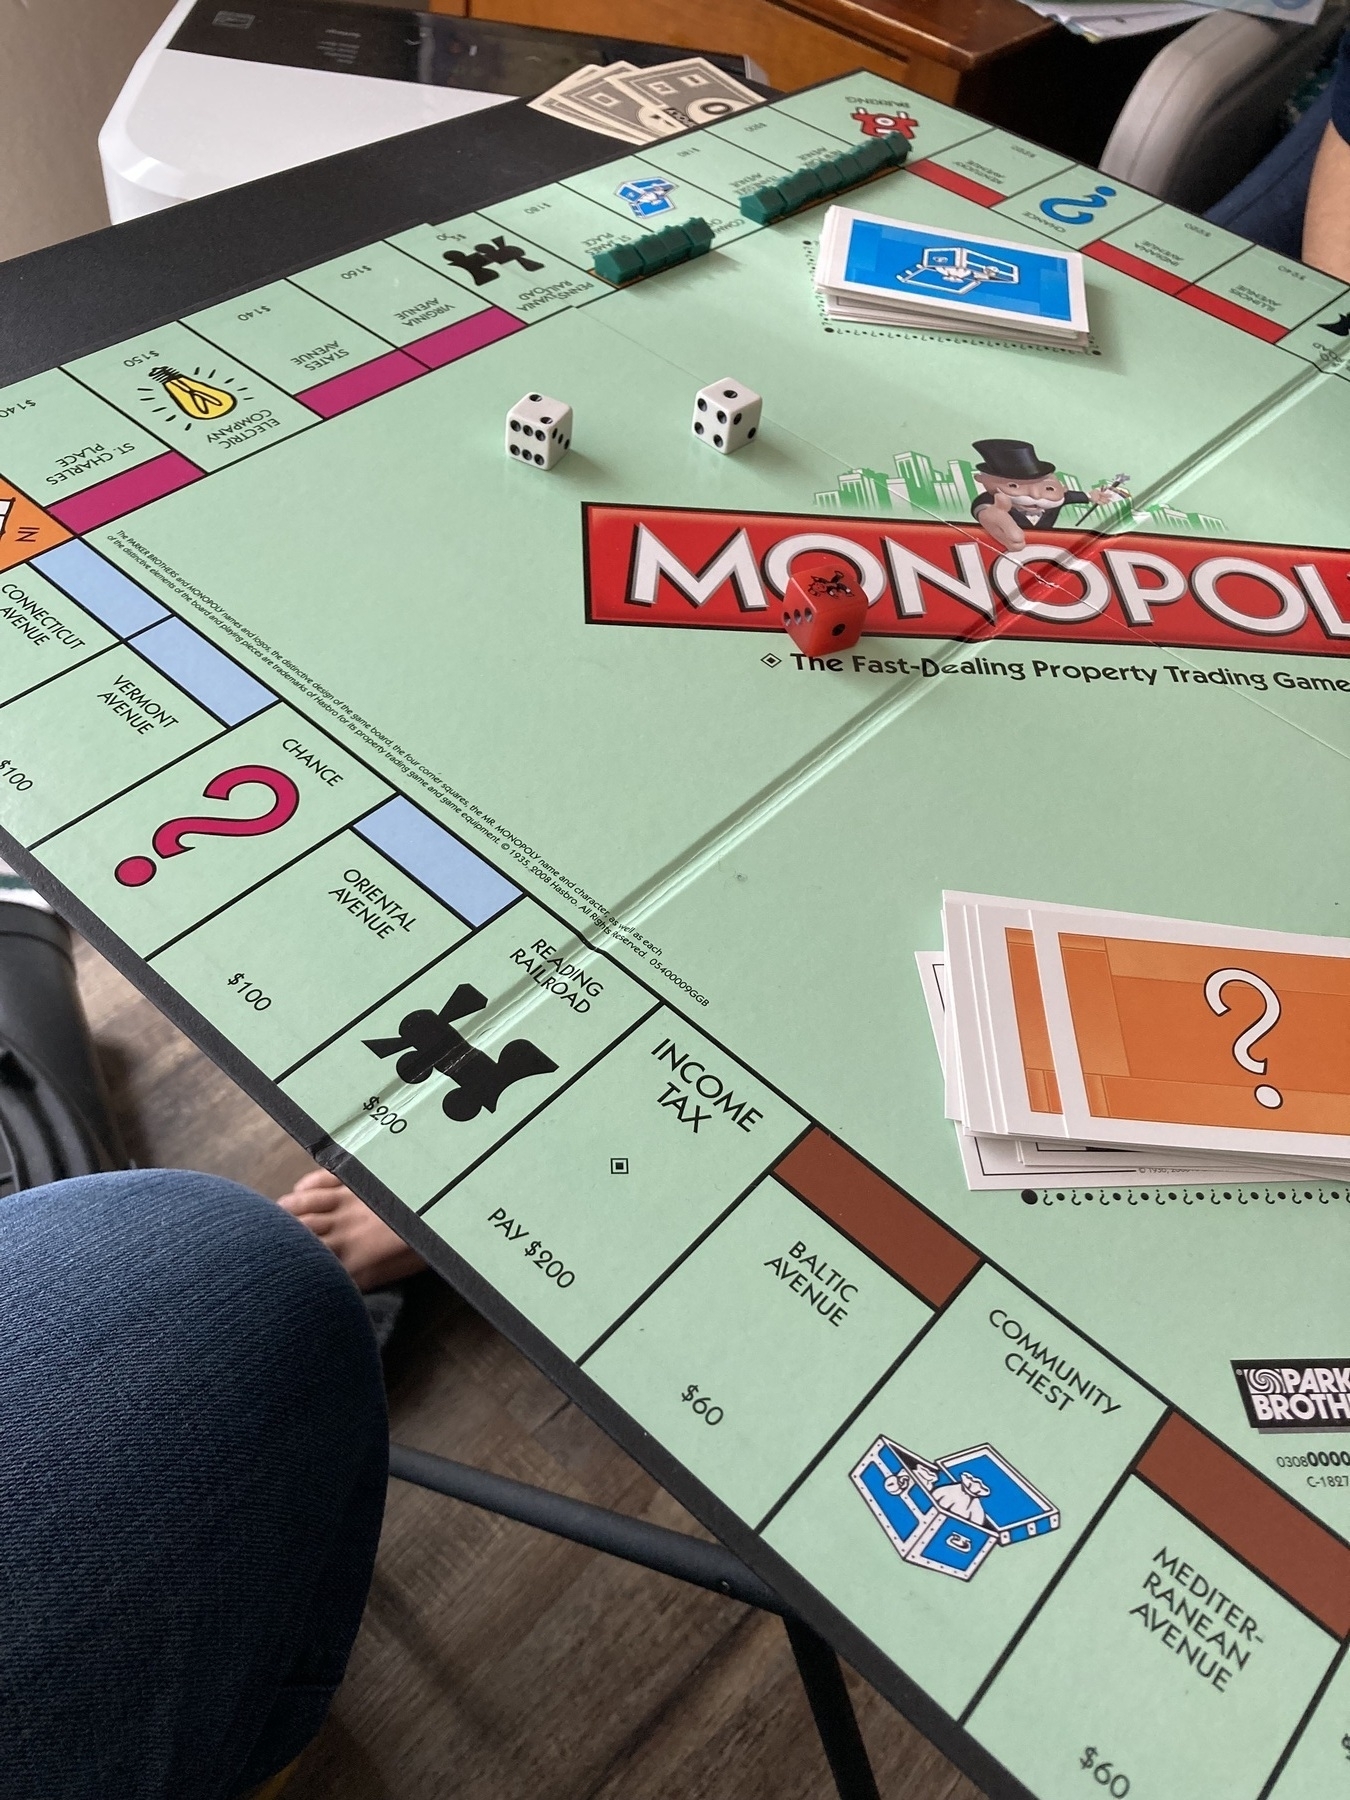 Monopoly game about to start. 